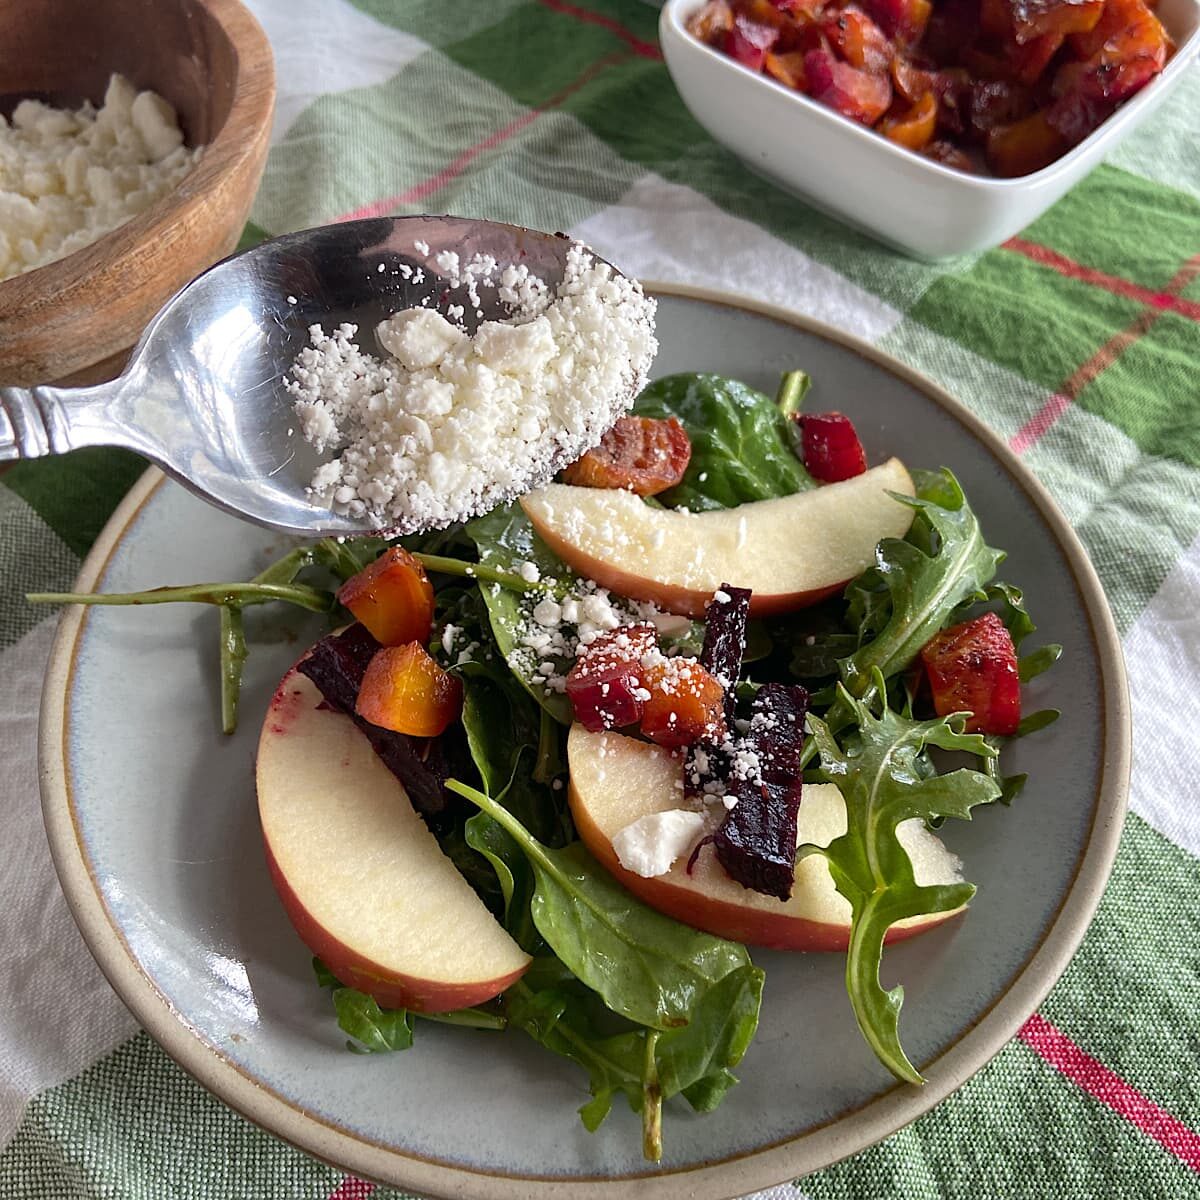 Sprinkle crumbled feta cheese over greens, apples, and beets.